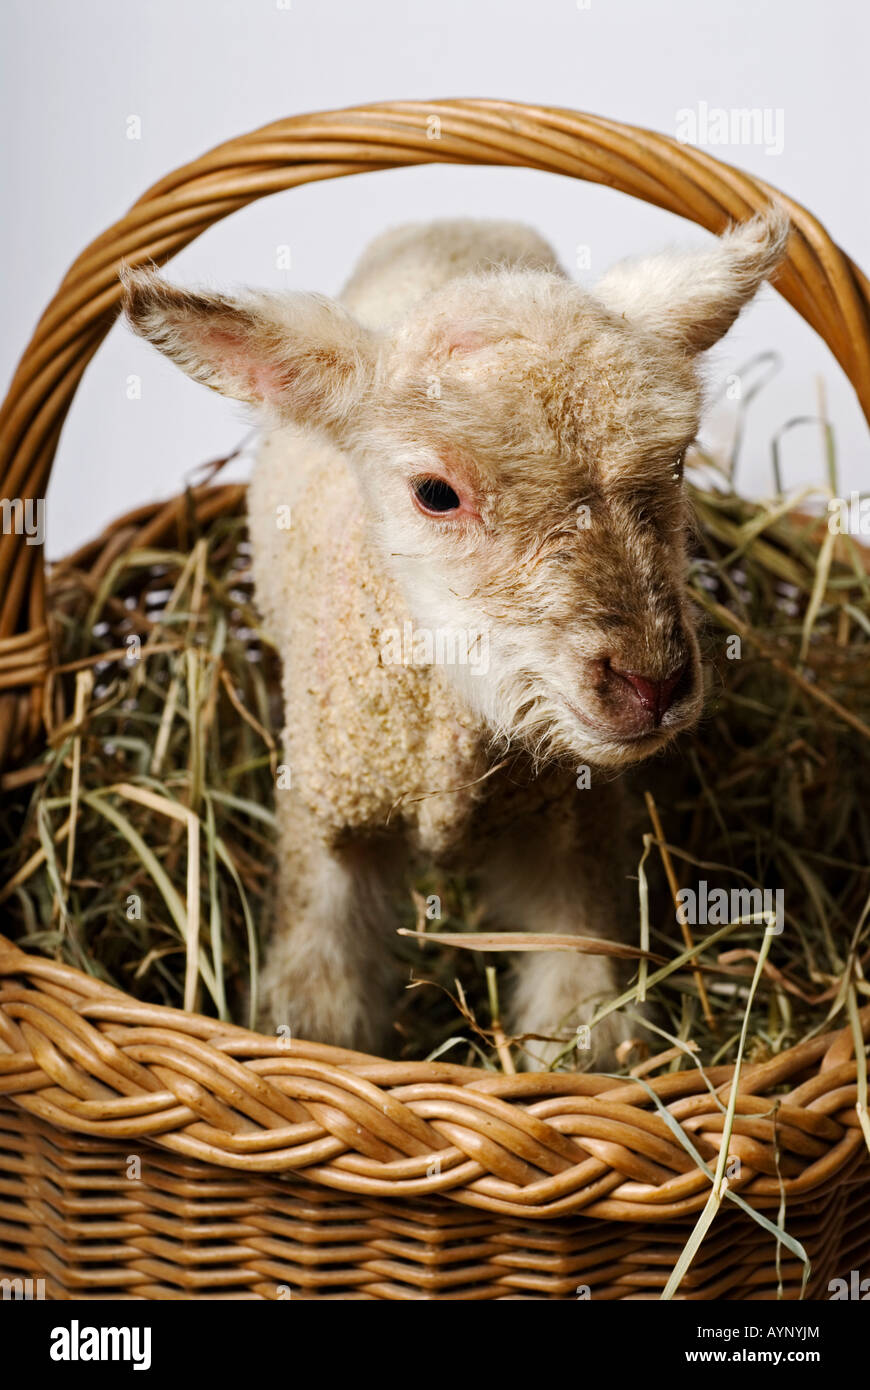 Stock photo a lamb in a wicker basket filled with hay Stock Photo - Alamy